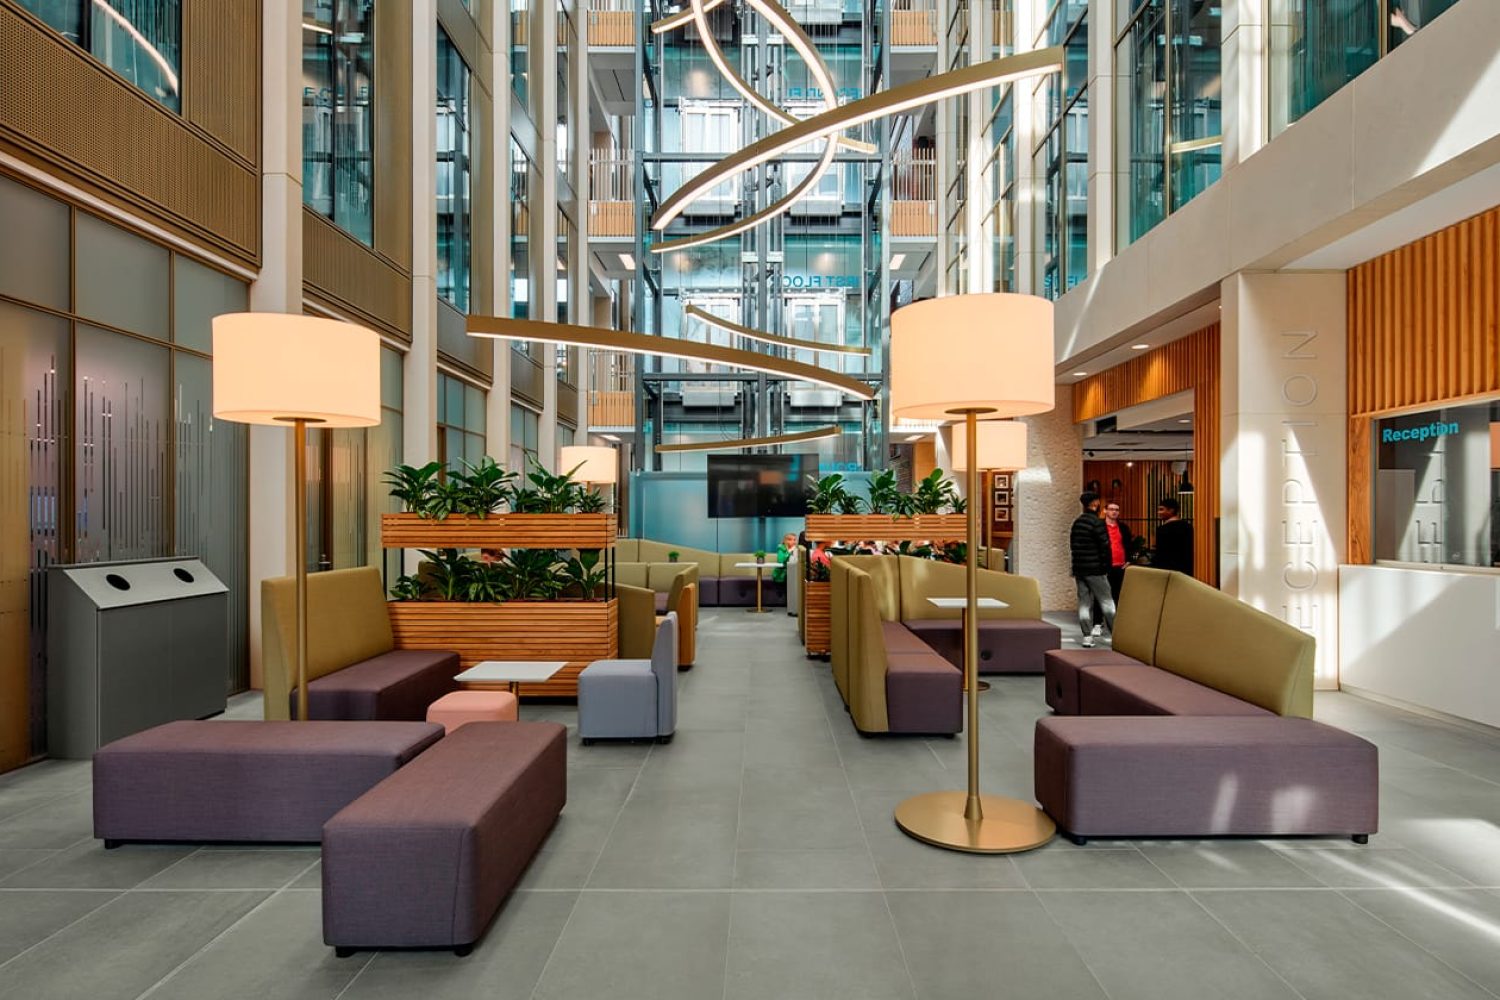 The lobby of a modern office building with office furniture in it.